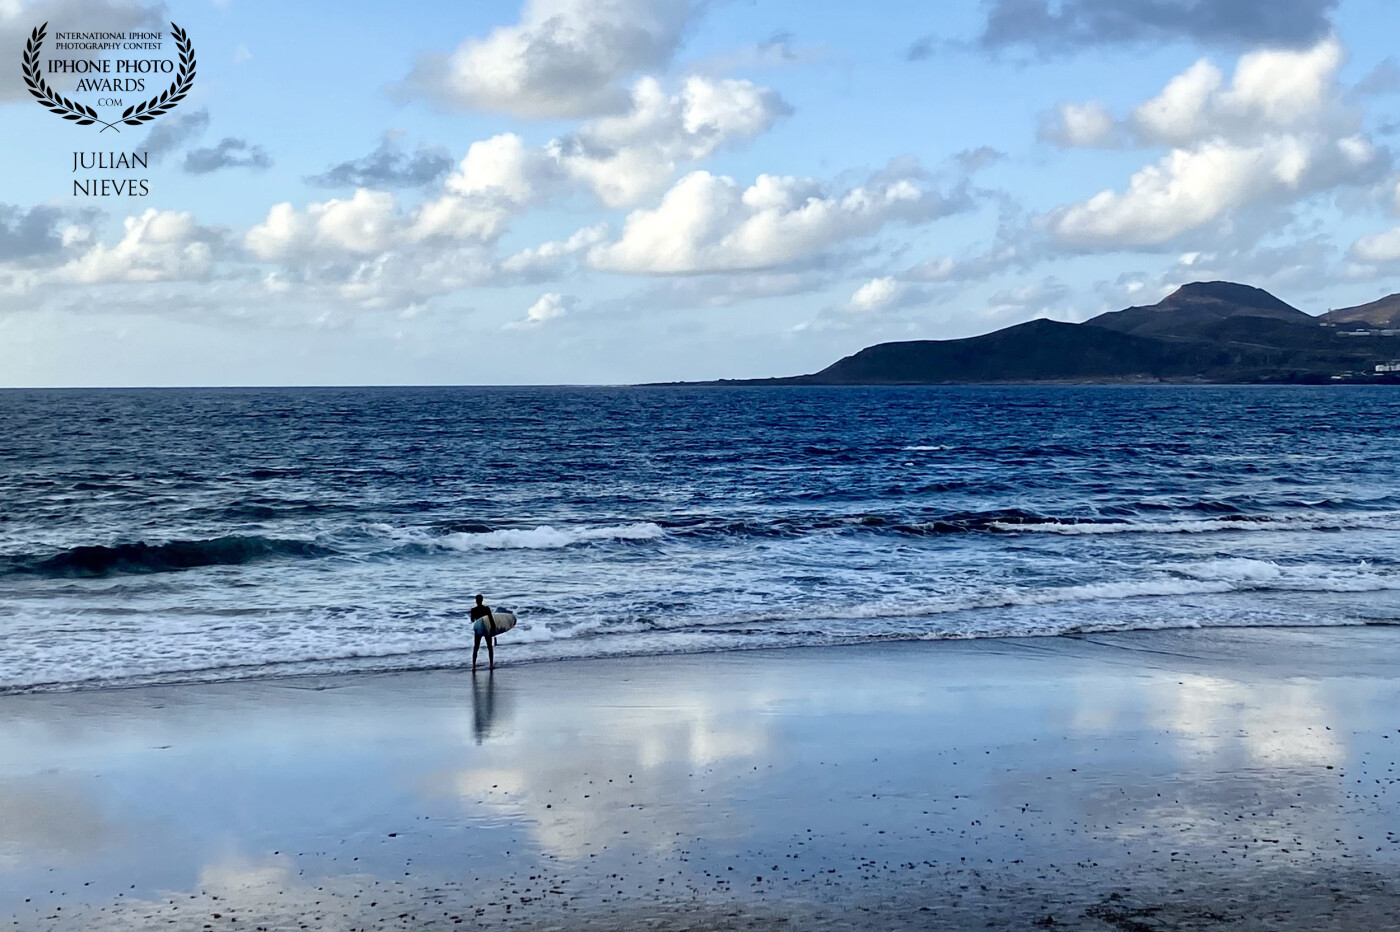 Play of light, color and reflections on the beach of Las Canteras, and the surfer as the protagonist of the scene, in Las Palmas de Gran Canaria.